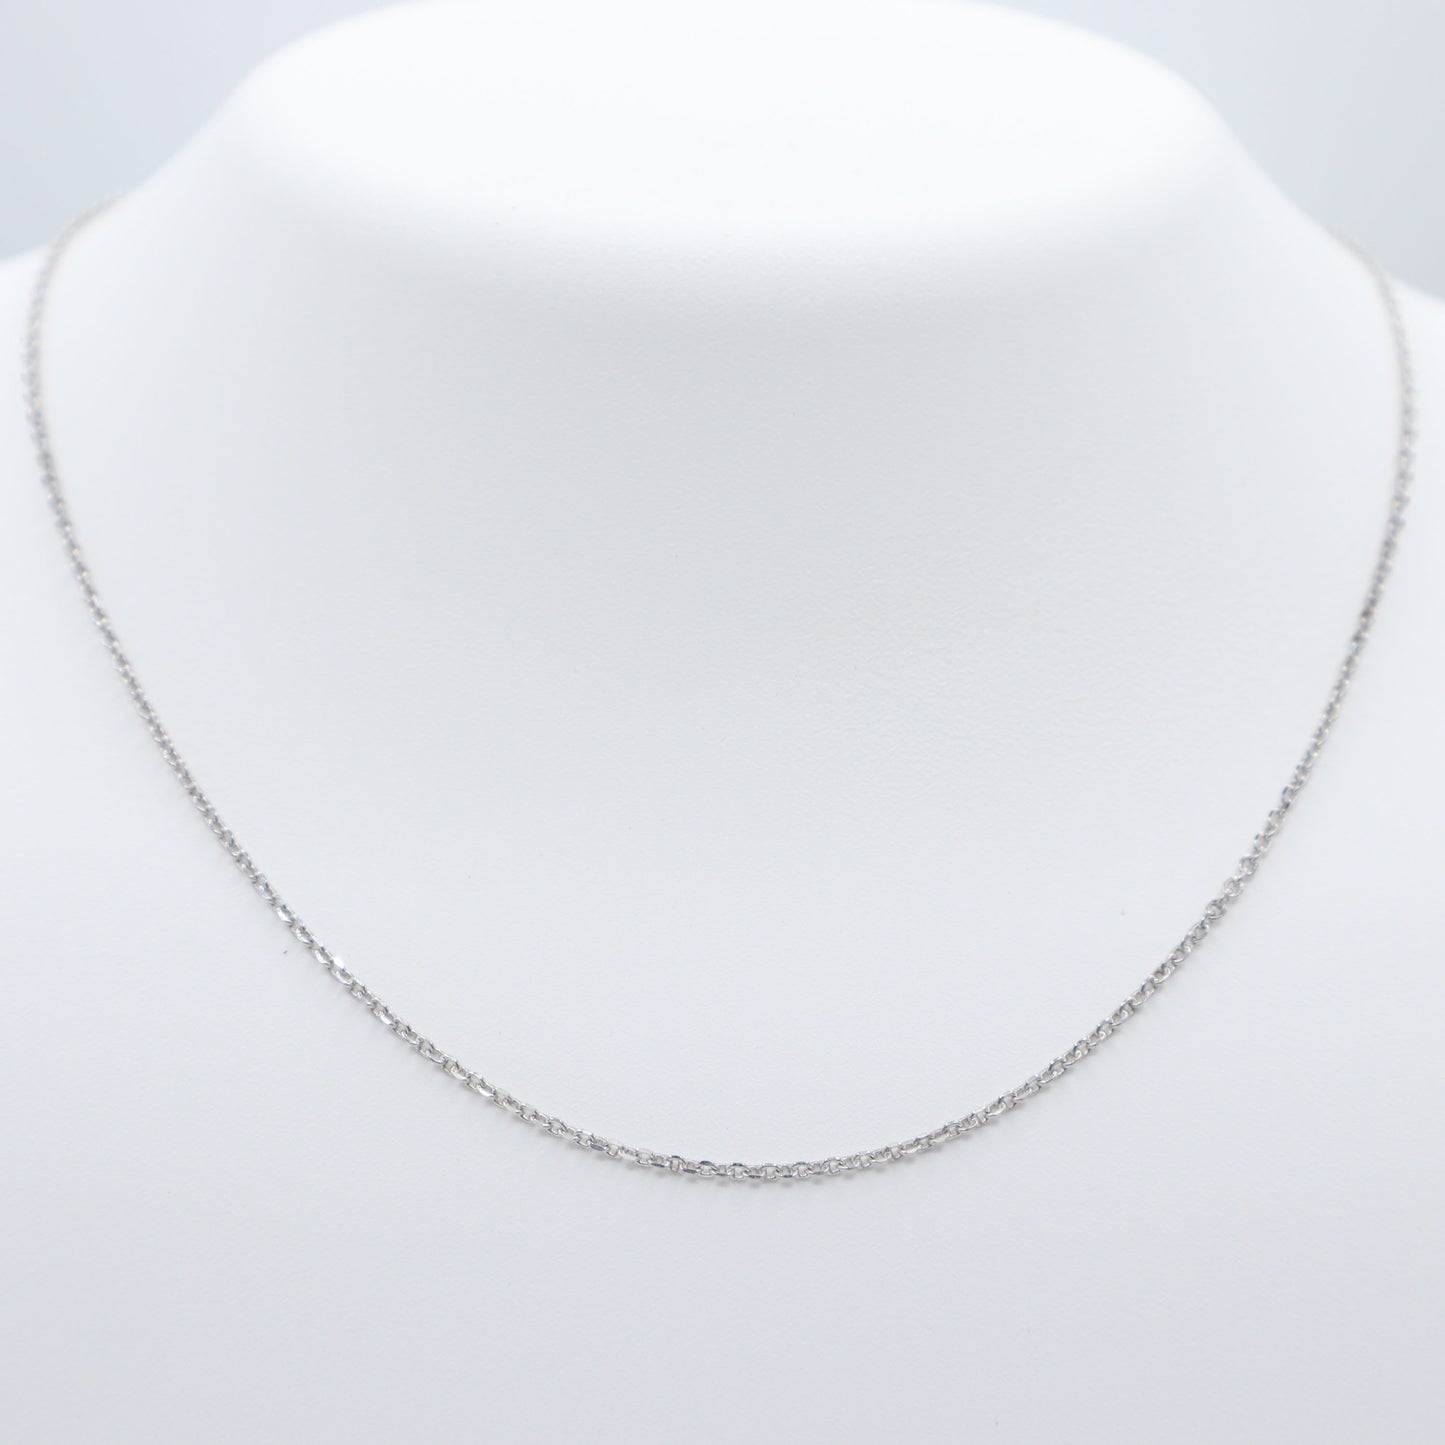 White Gold Cable Chain 18"